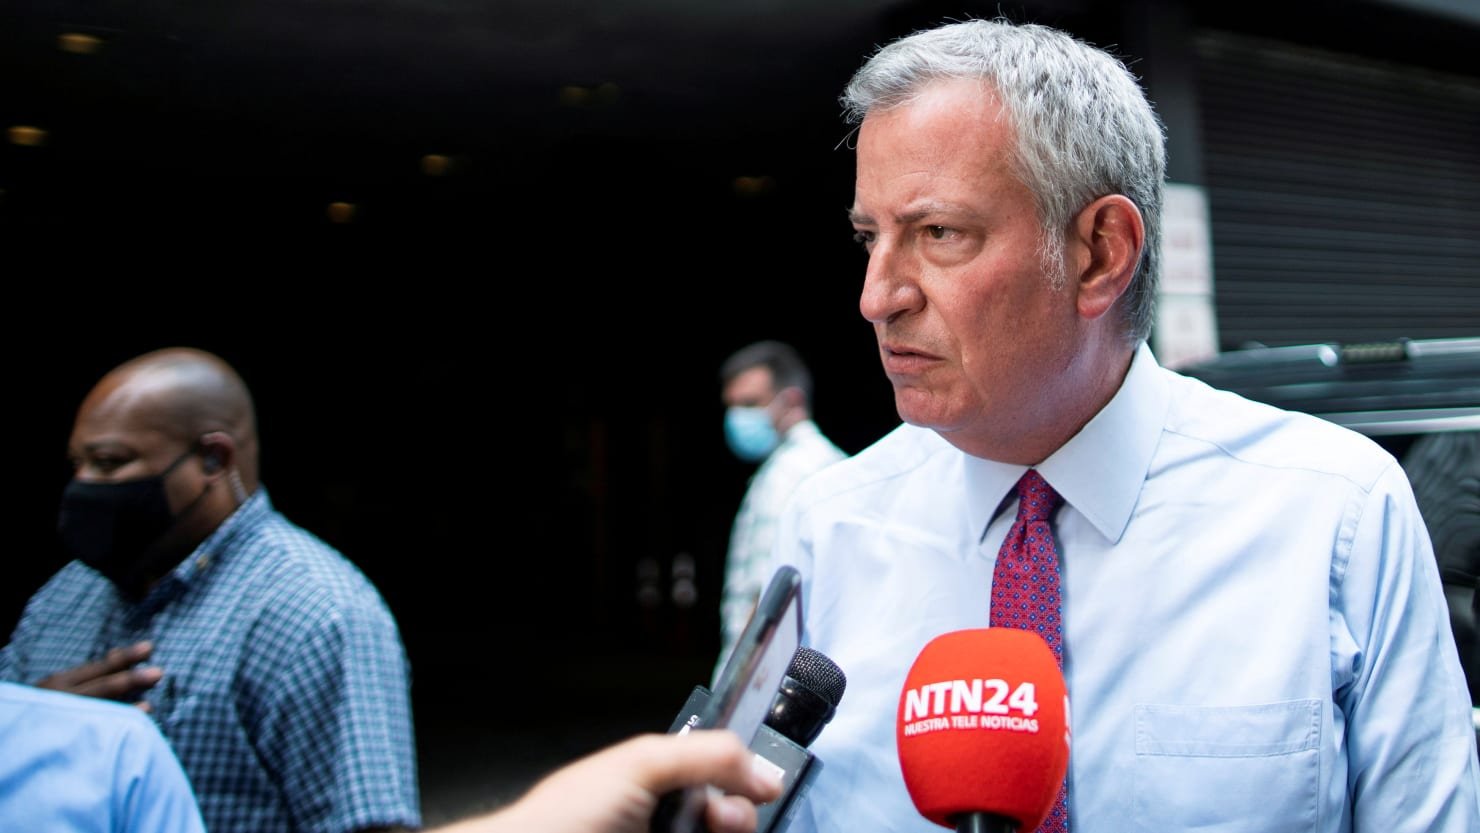 De Blasio Sounding Out Governor Run After Cuomo’s Downfall, Says Report